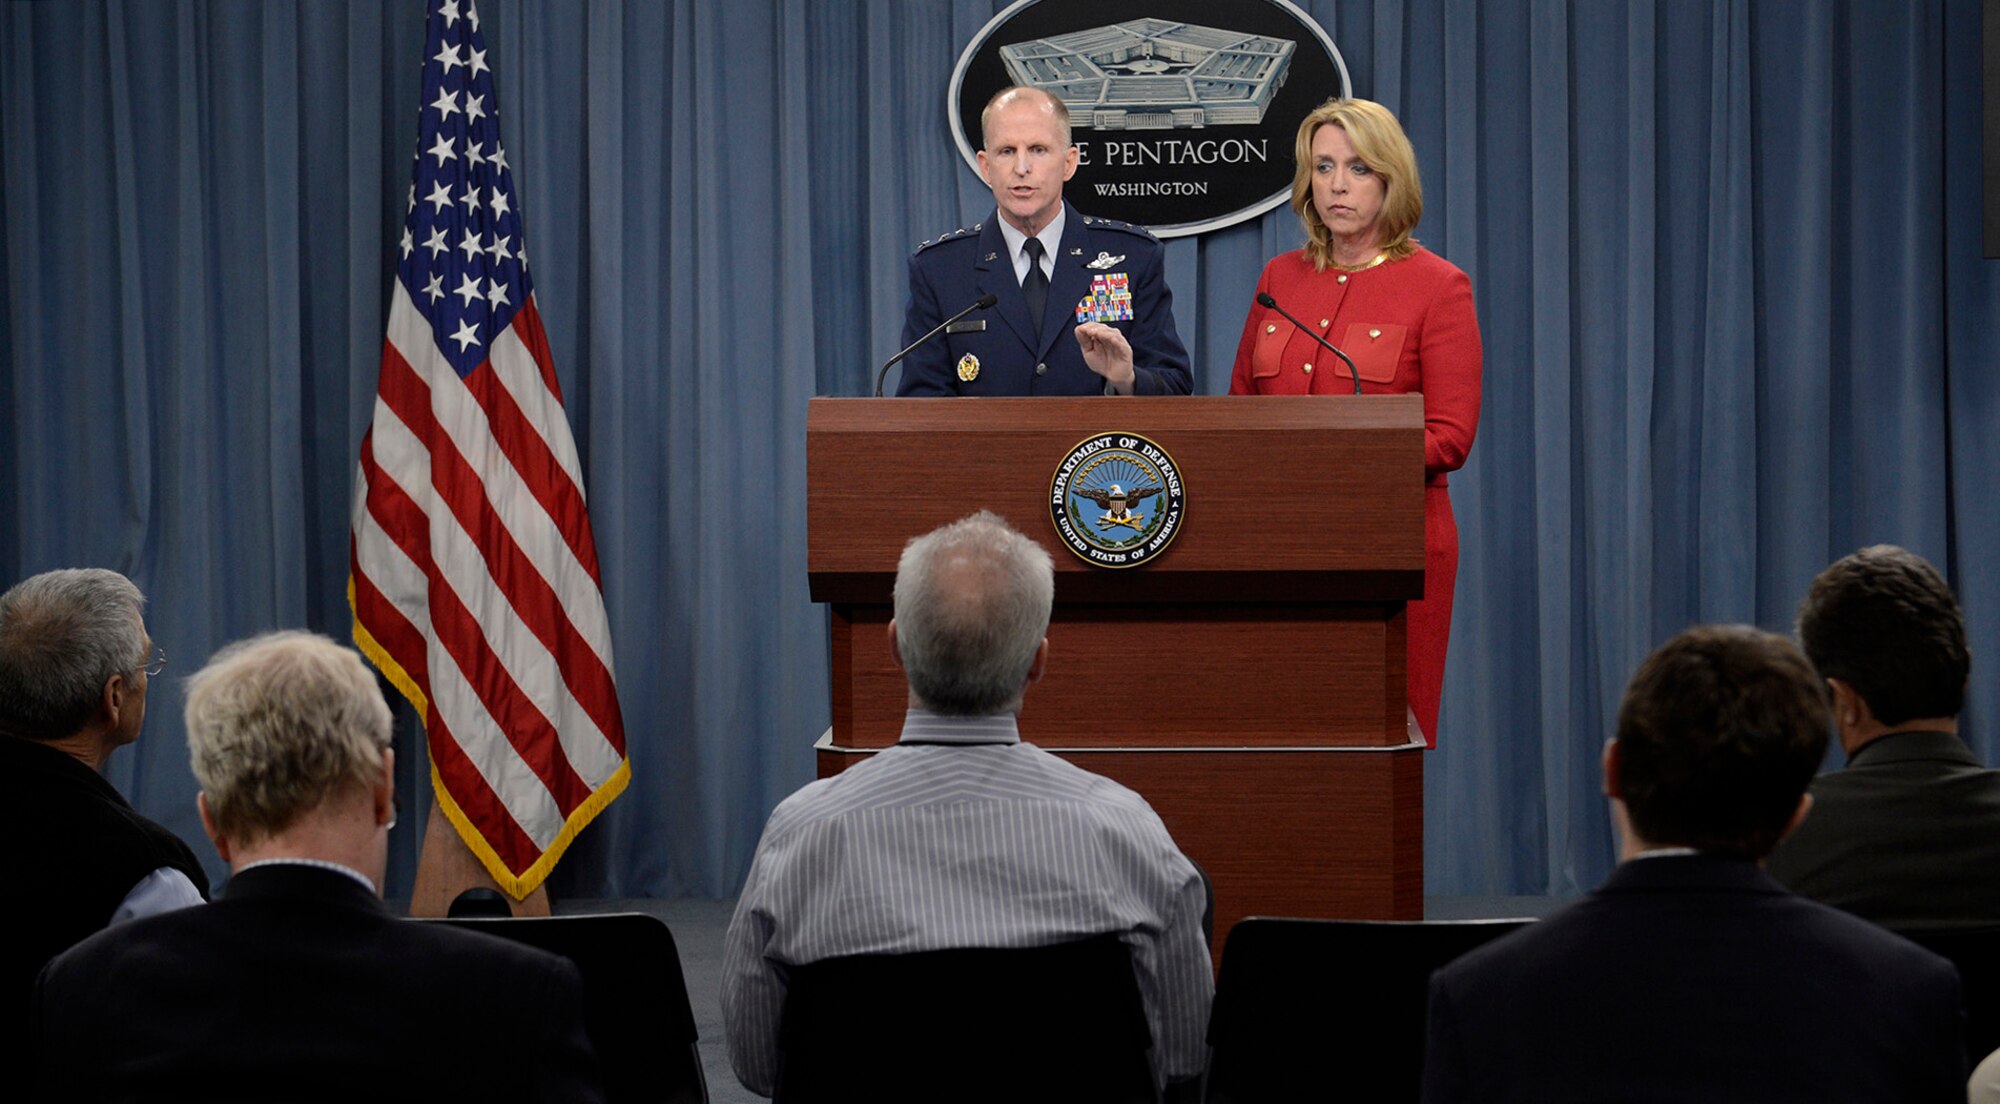 Secretary of the Air Force Deborah Lee James and Lt. Gen. Stephen Wilson provide updates on the Malmstrom Air Force Base, Mont., test compromise investigation findings to the Pentagon Press Corps March 27, 2014, in Washington, D.C. Air Force leaders discussed personnel accountability and the action plan to improve the nuclear enterprise. Wilson is the Global Strike Command commander. (U.S. Air Force photo/Scott M. Ash)